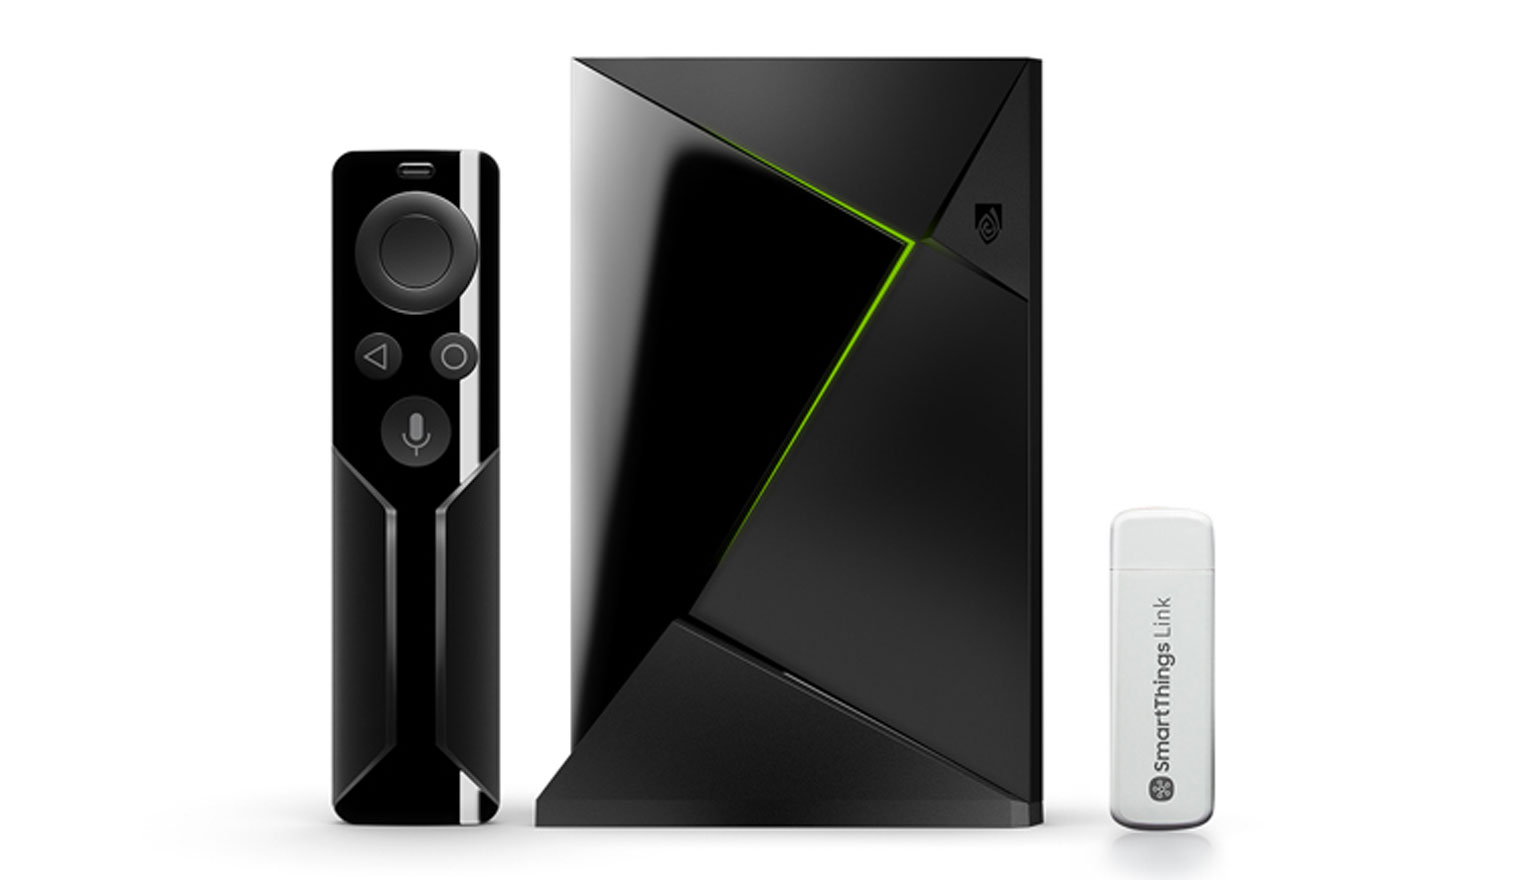 A new version of the Nvidia Shield, Nvidia Shield Smart Home Edition announced, namely the Smart Home Edition with the SmartThings link hub